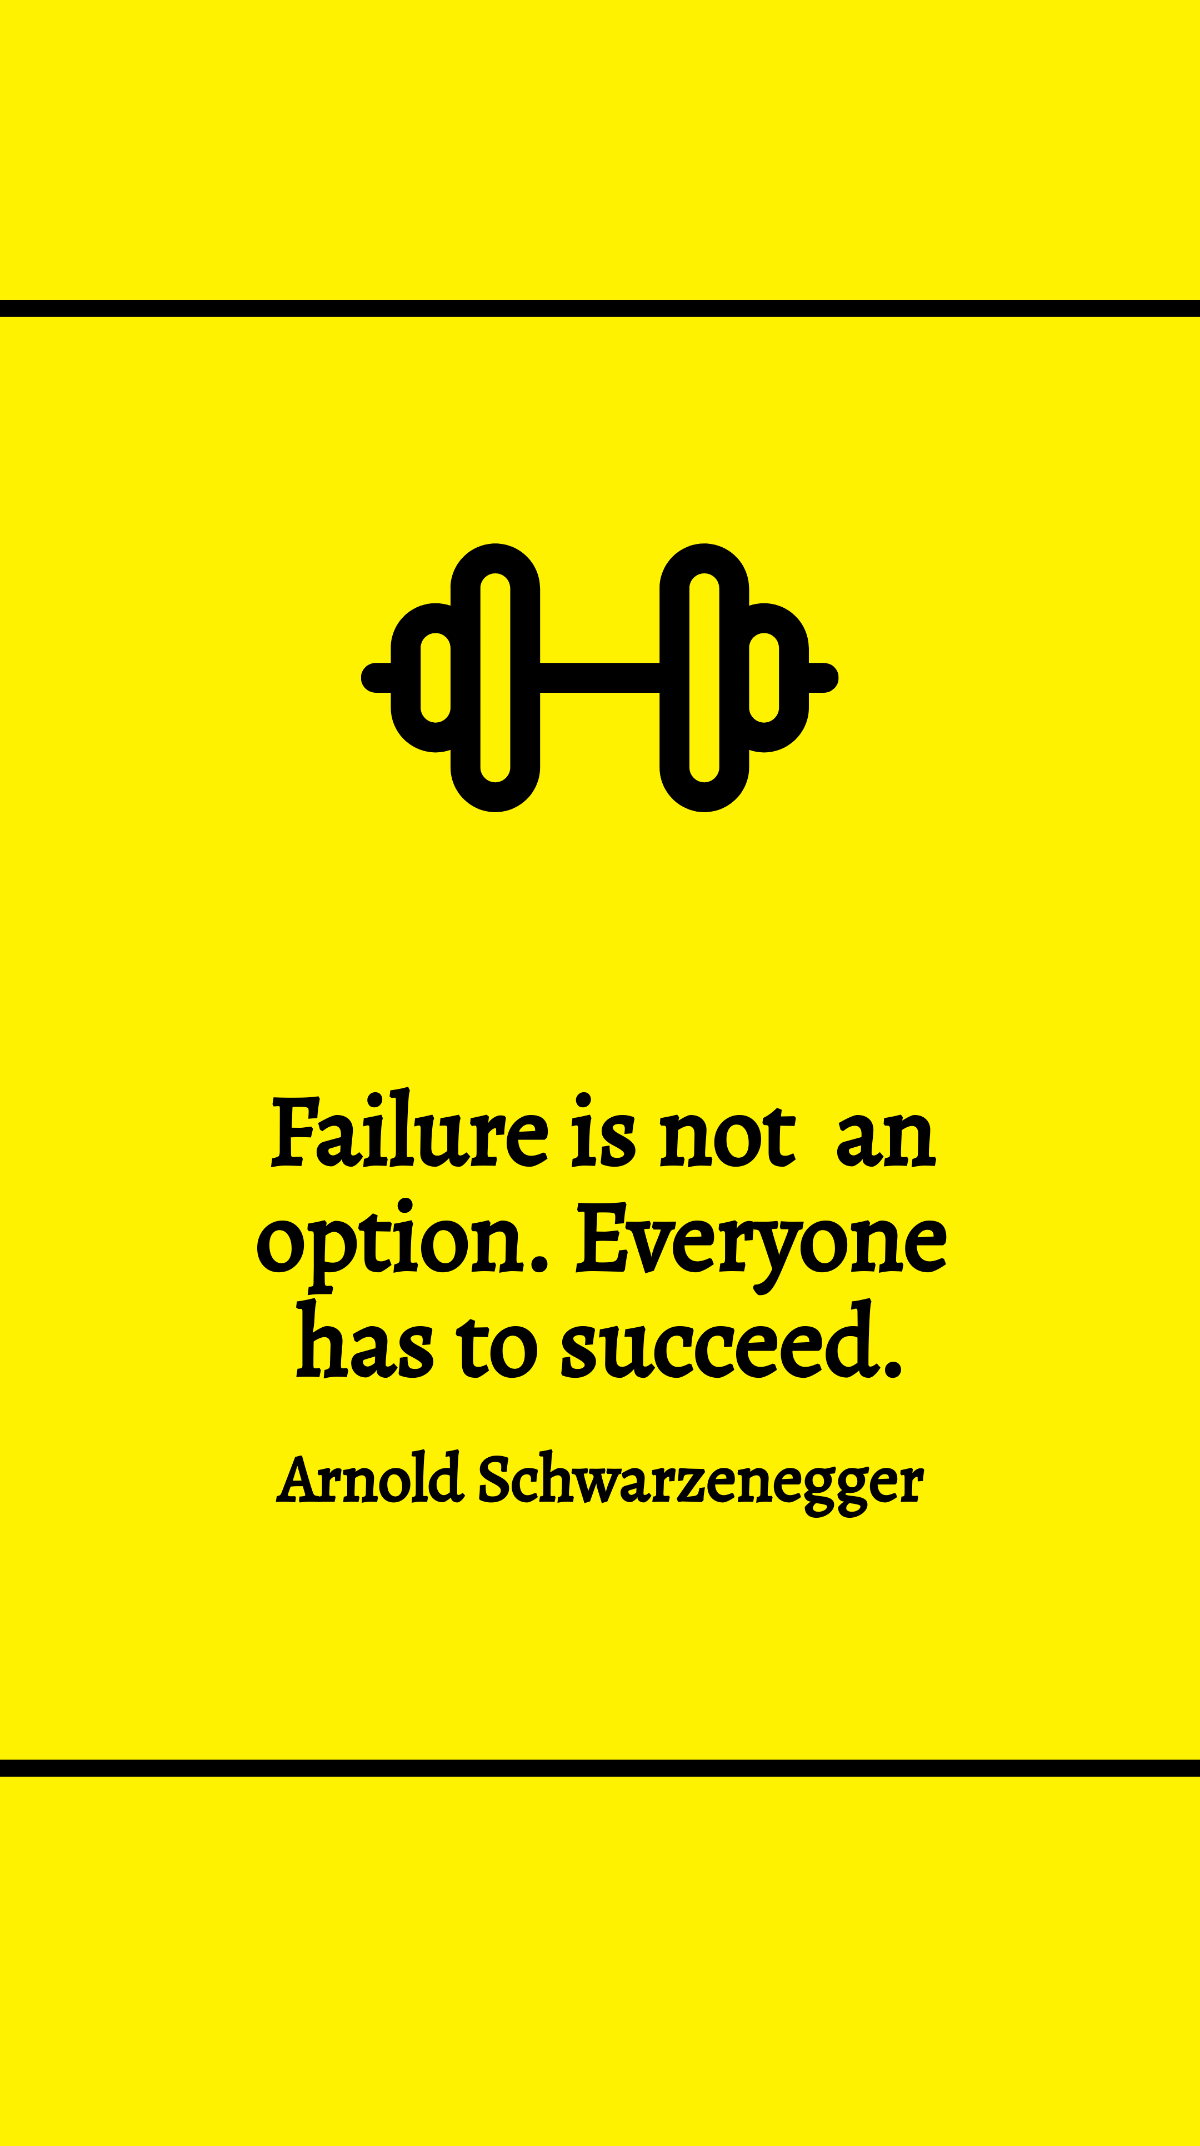 Arnold Schwarzenegger - Failure is not an option. Everyone has to succeed. Template